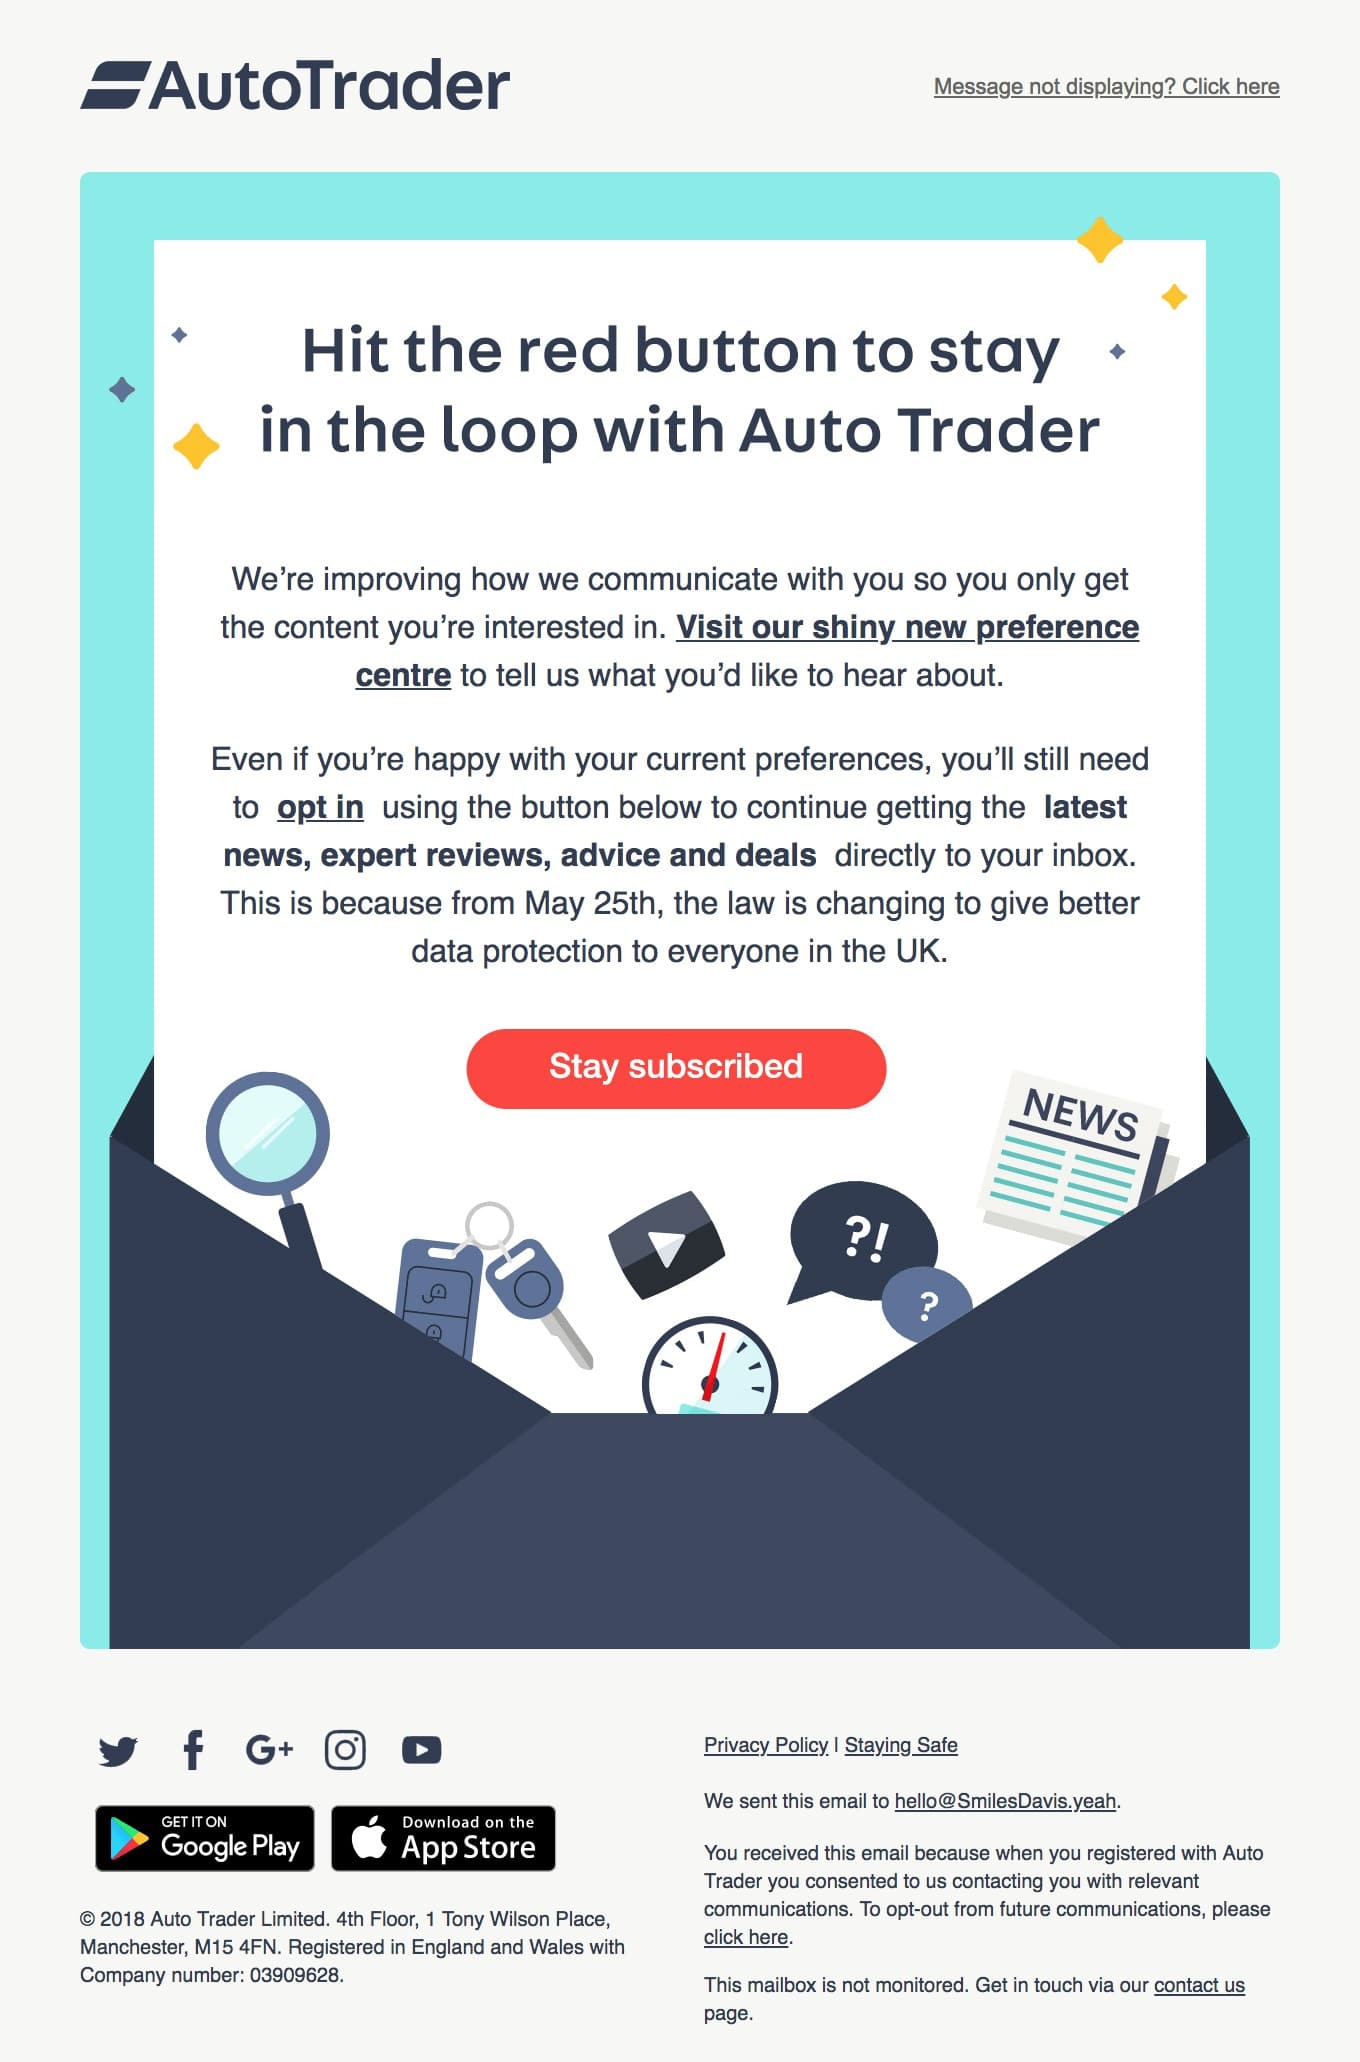 autotrader might not be a small business, but you can still implement the same tactics to grow your email list.